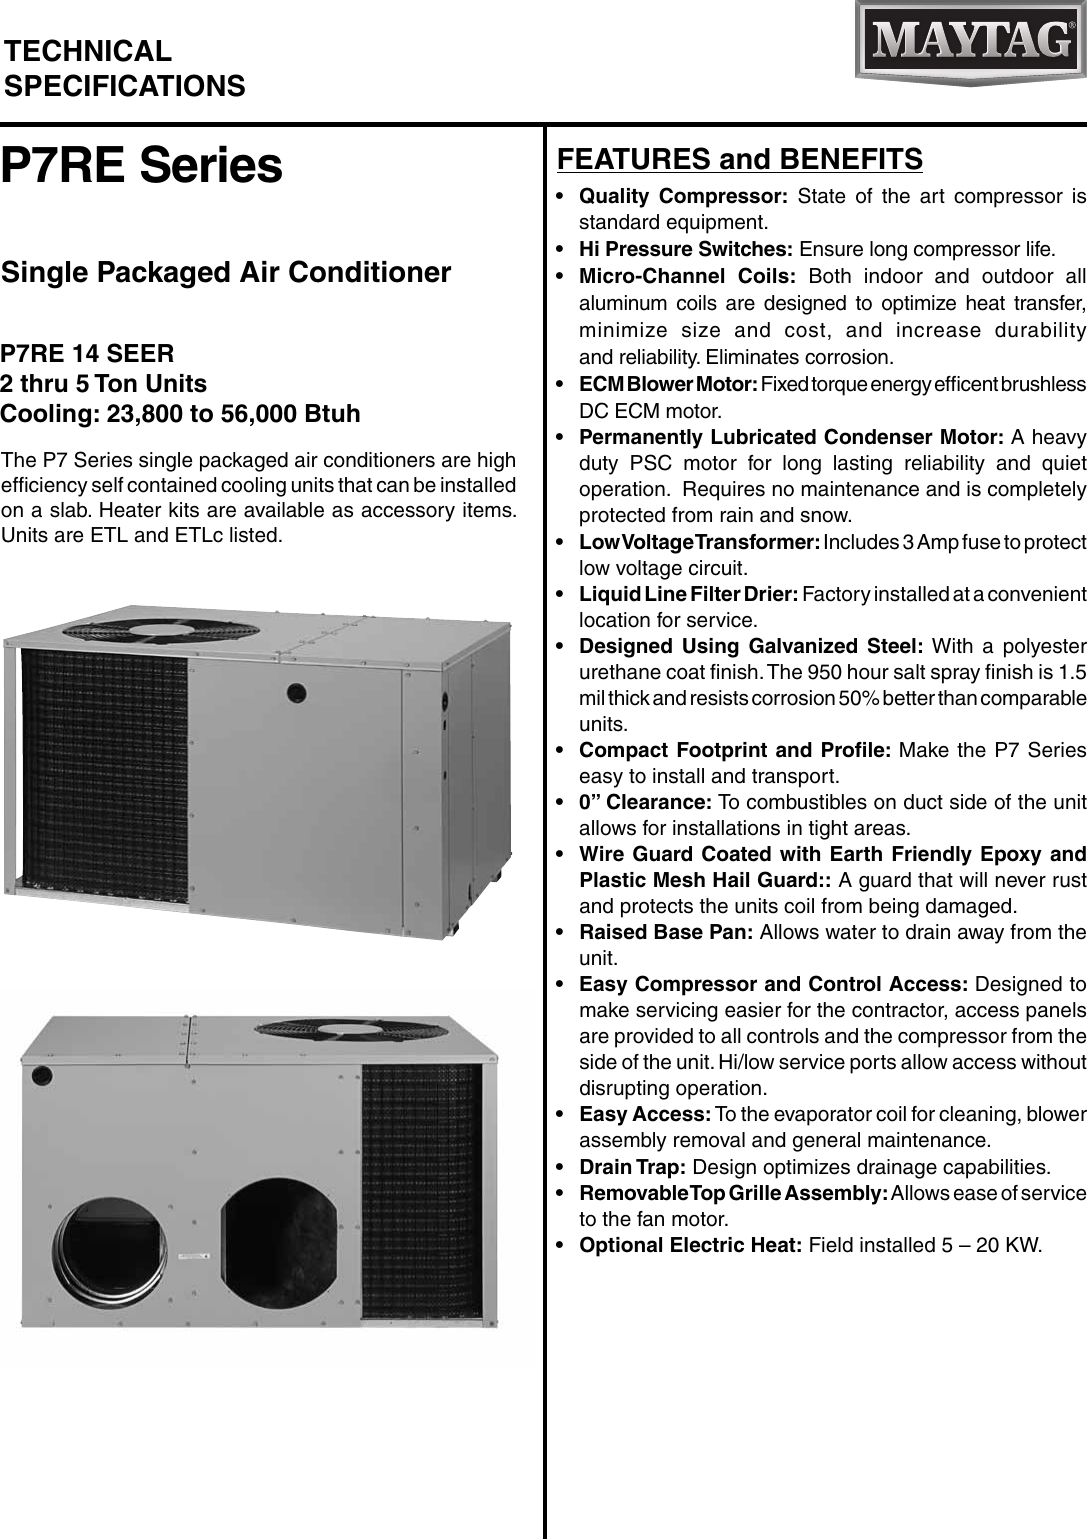 Page 1 of 12 - Maytag Maytag-P7Re-Maytag-M120-14-Seer-Packaged-Air-Conditioner-Technical-Literature-  Maytag-p7re-maytag-m120-14-seer-packaged-air-conditioner-technical-literature